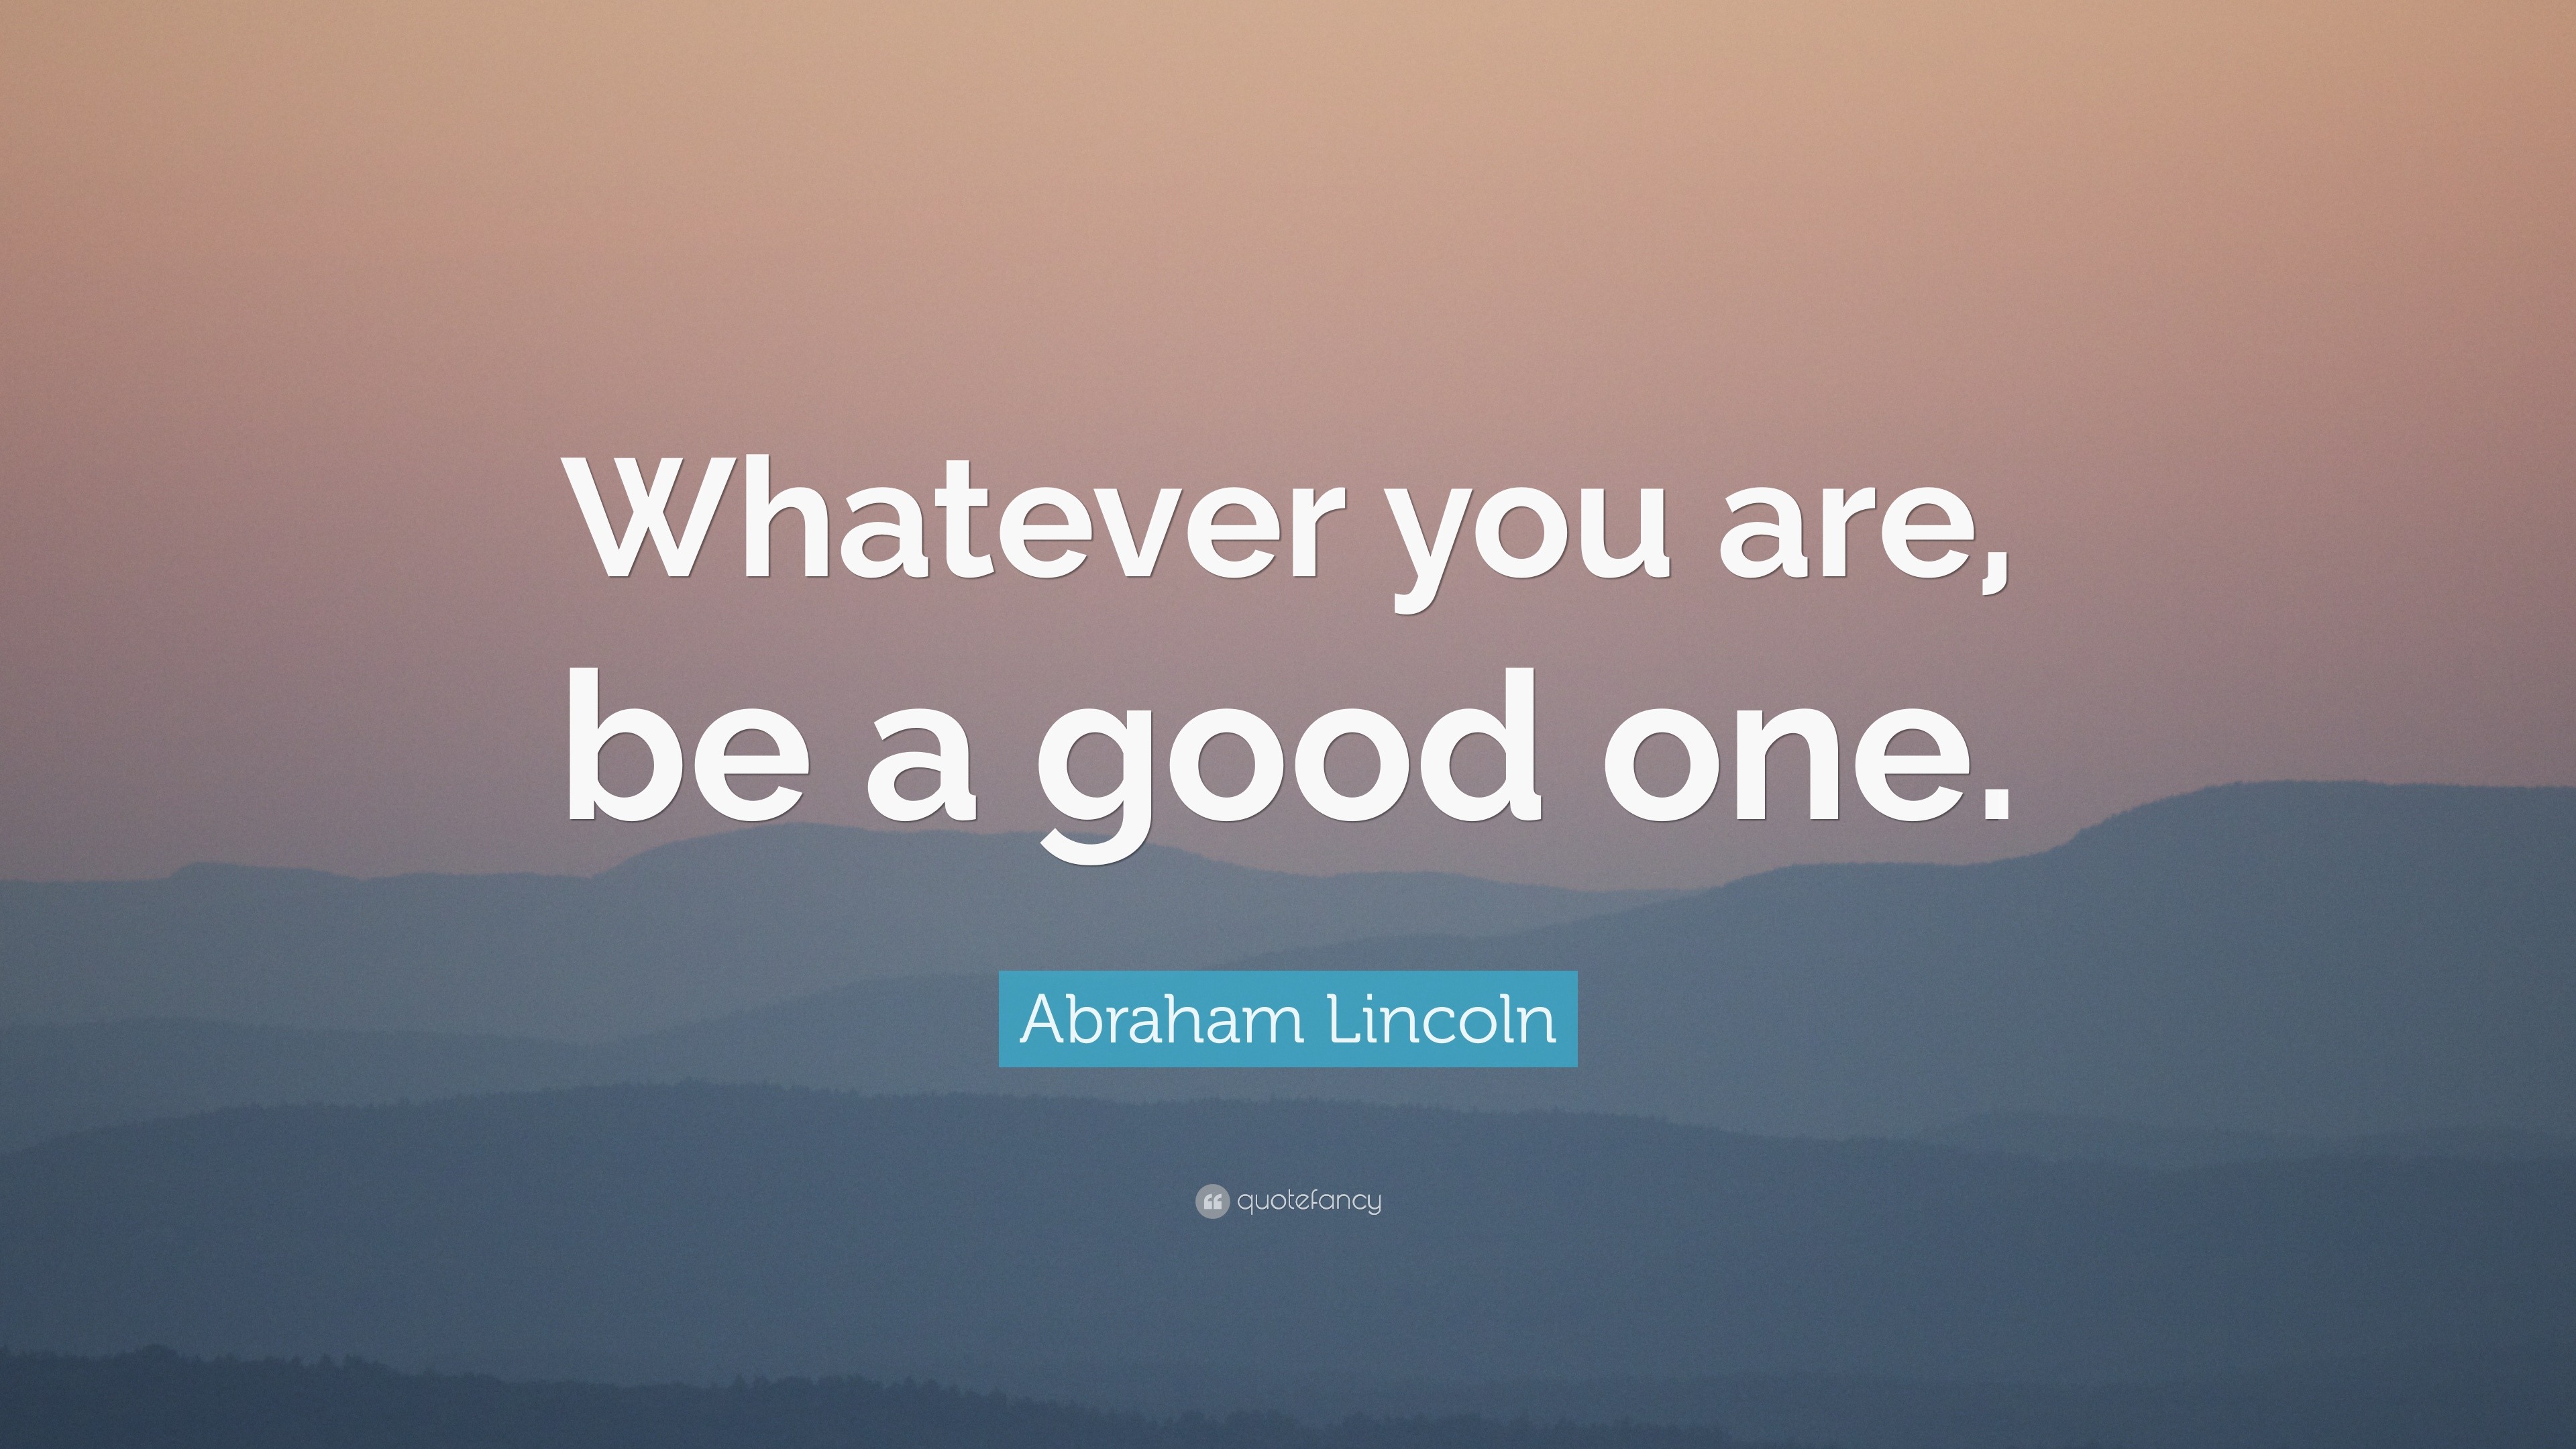 Abraham Lincoln Quote: “Whatever you are, be a good one.” (23 wallpapers) - Quotefancy3840 x 2160